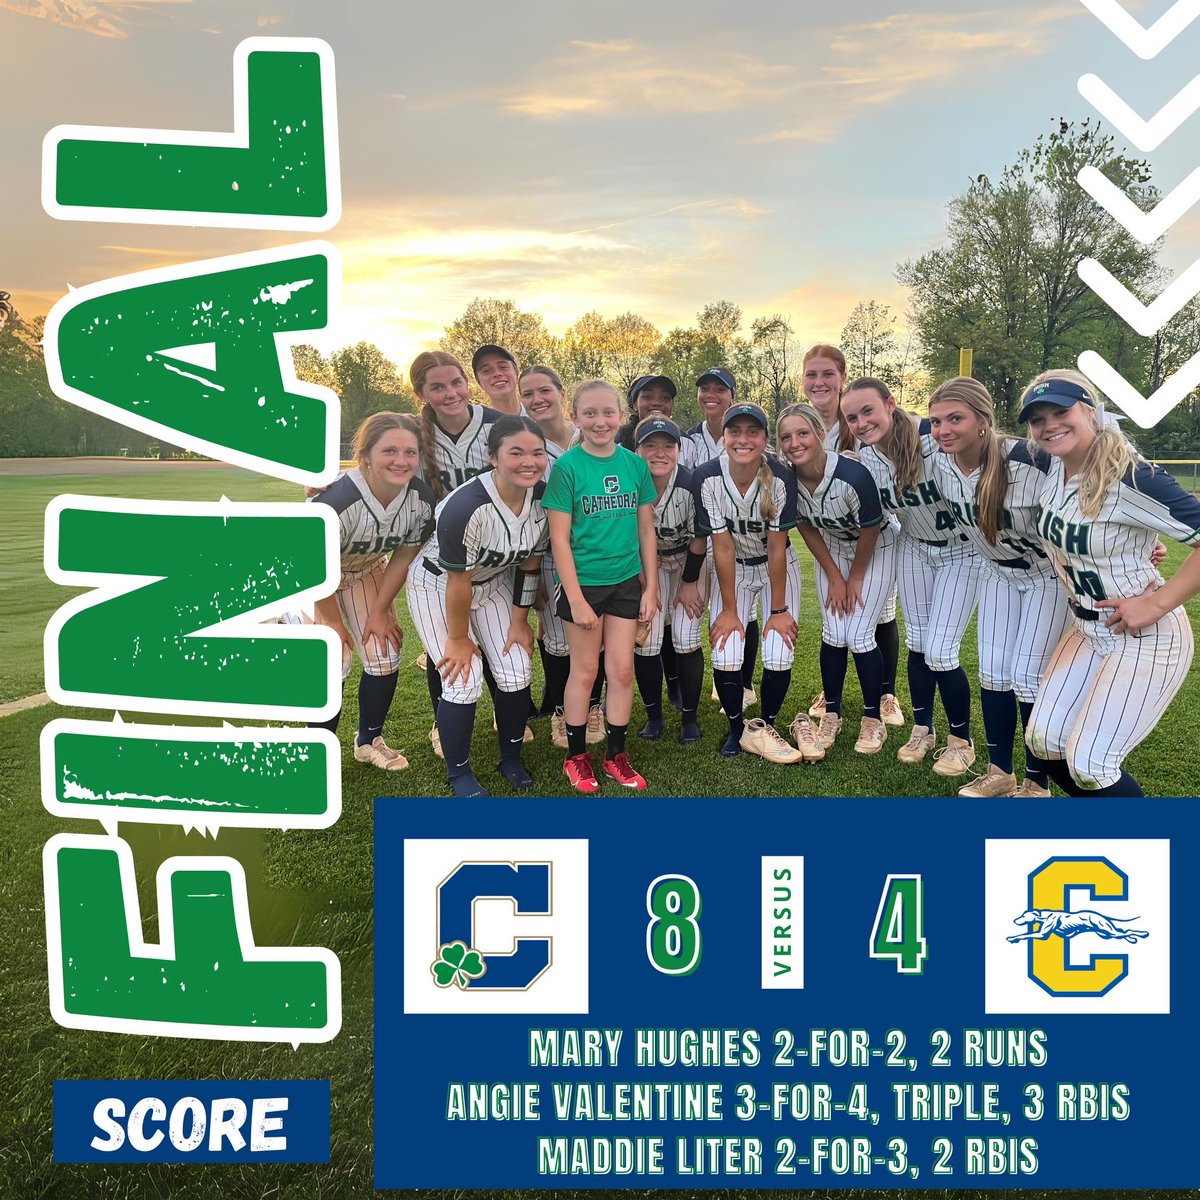 An exciting win for the Irish! With the bases loaded and one out in the top of the 7th, pitcher ⁦@sidneyfeczko⁩ coaxed the Greyhound batter to ground out into a 4-6-3 double play to end the game!